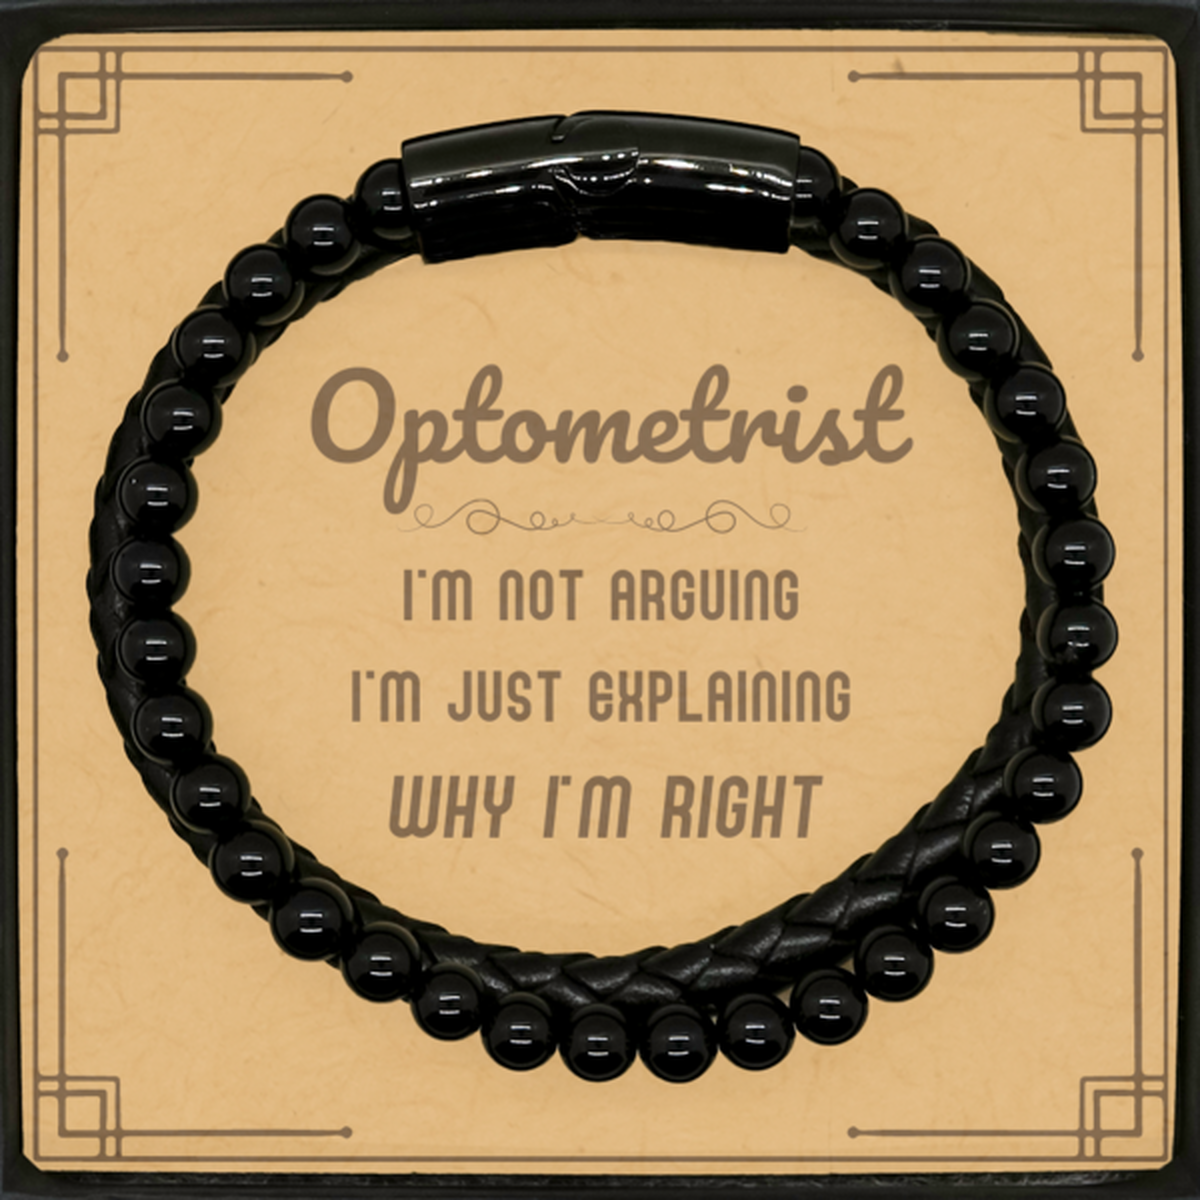 Optometrist I'm not Arguing. I'm Just Explaining Why I'm RIGHT Stone Leather Bracelets, Funny Saying Quote Optometrist Gifts For Optometrist Message Card Graduation Birthday Christmas Gifts for Men Women Coworker